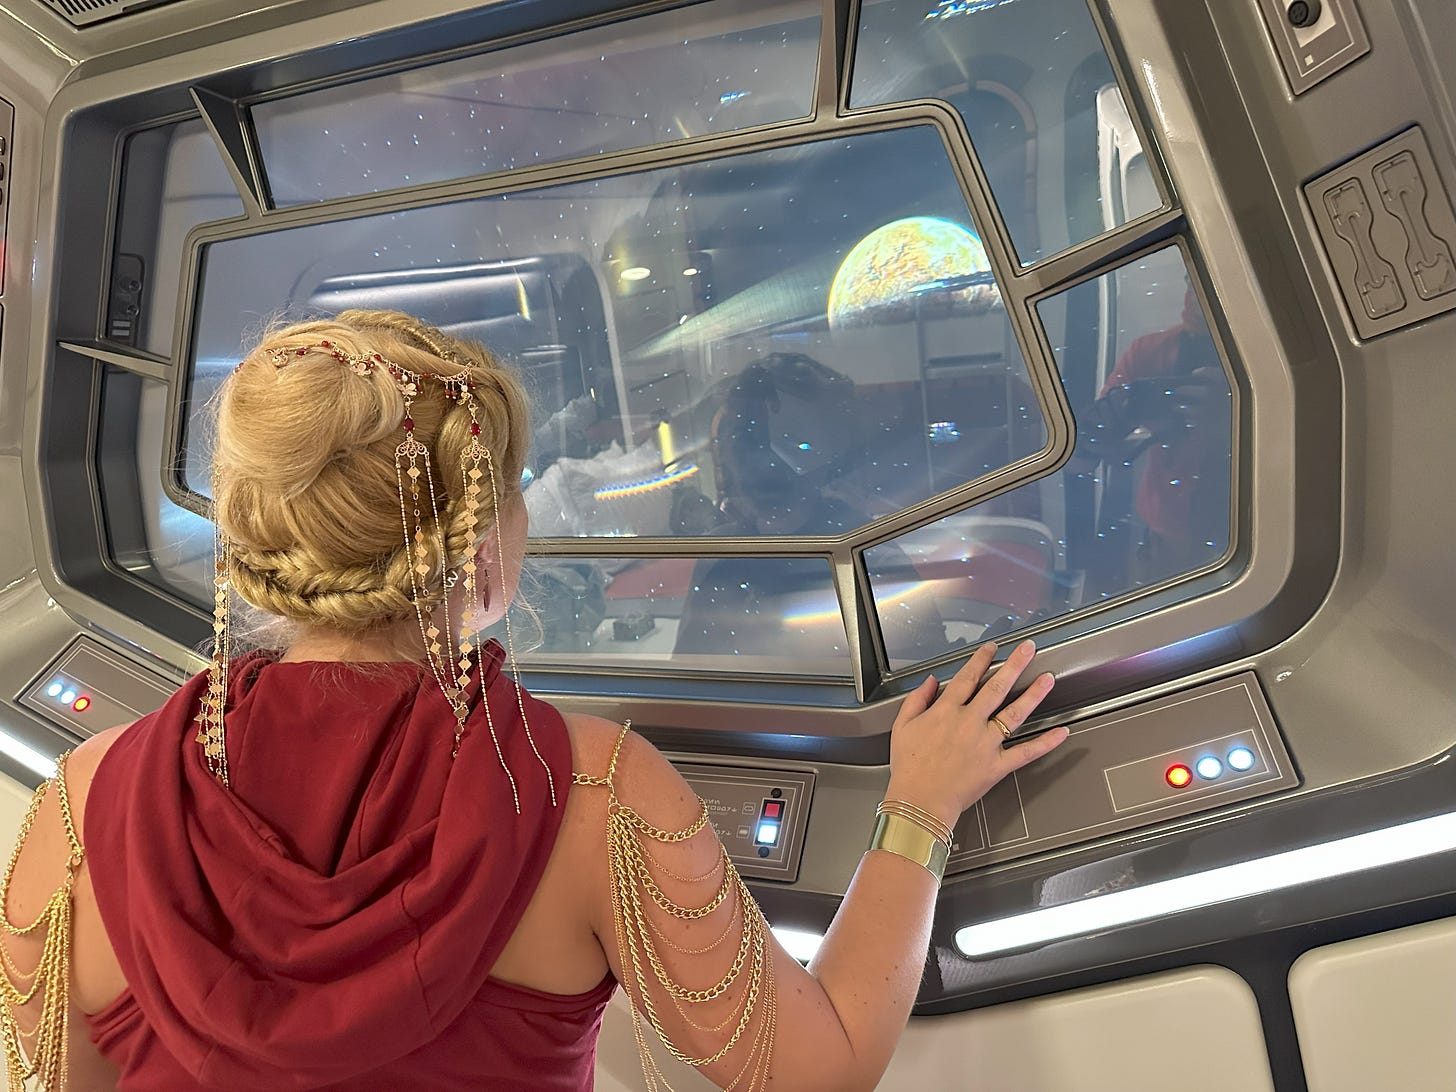 Cass standing with her back to the camera, looking out the viewscreen of the Halcyon passenger room, which shows the planet Chandrila. She is wearing a red hooded dress; her hair is elaborately styled with golden jewelry, and she wears gold shoulder jewelry and bracelets.